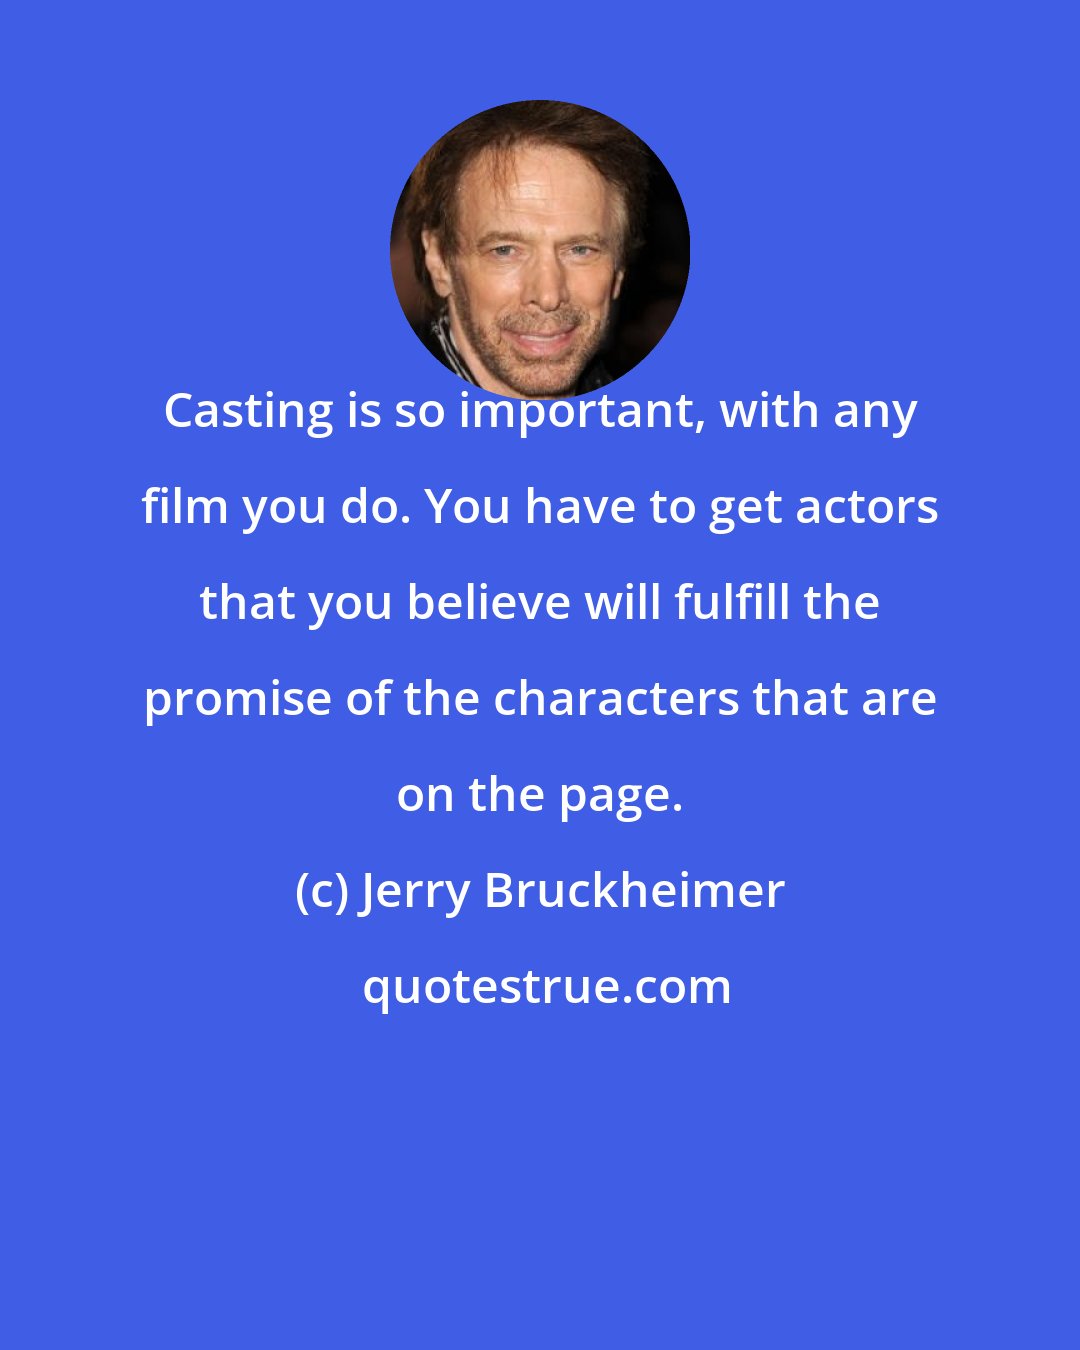 Jerry Bruckheimer: Casting is so important, with any film you do. You have to get actors that you believe will fulfill the promise of the characters that are on the page.